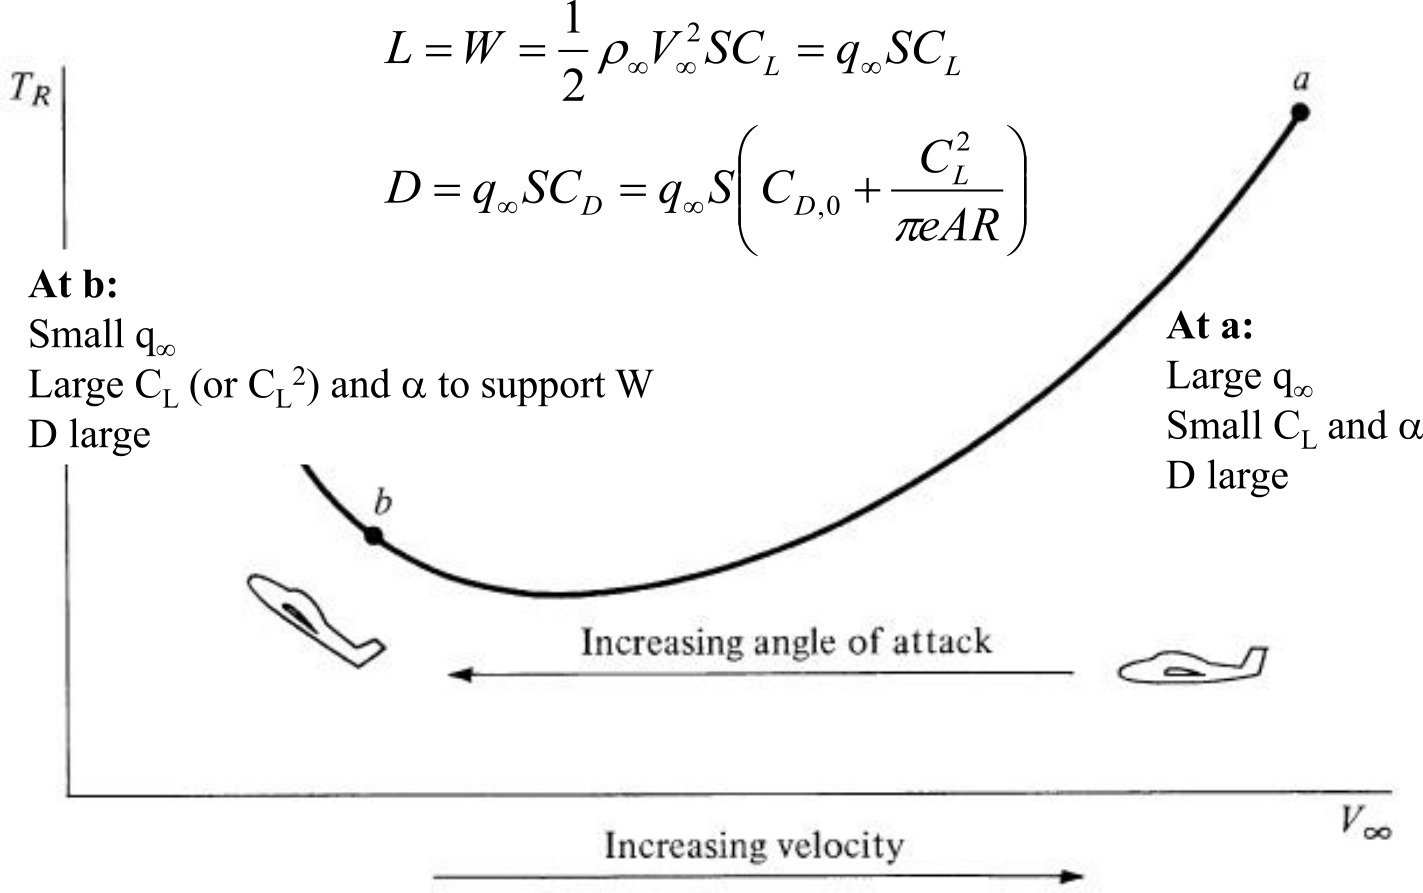 Different points on the $T_\mathrm{R}$ curve correspond to different angles of attack.